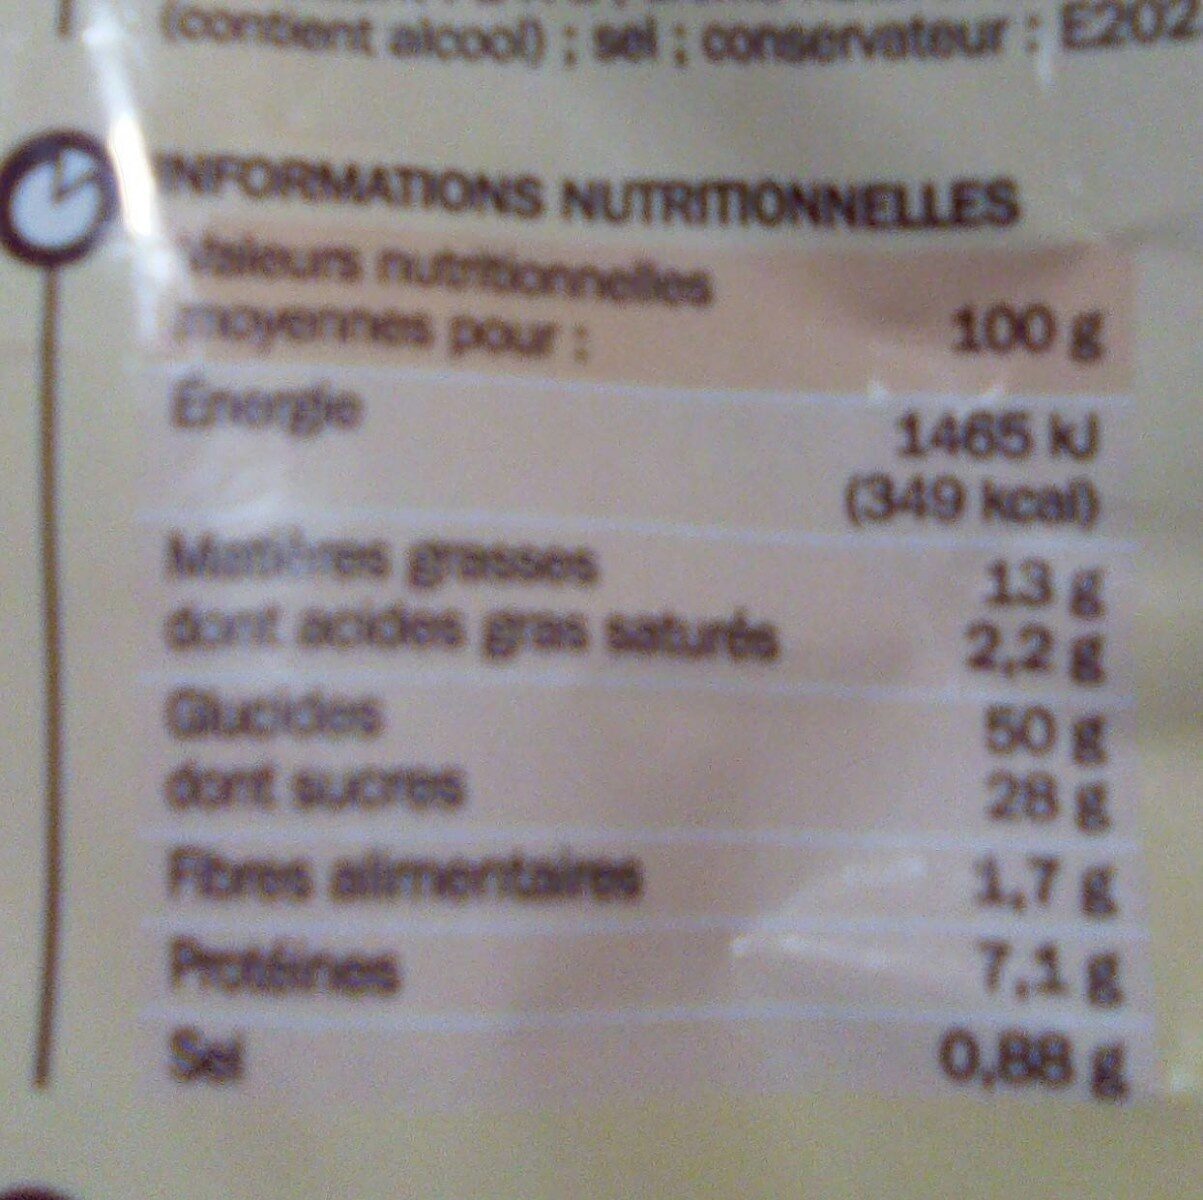 Pancakes nature - Nutrition facts - fr